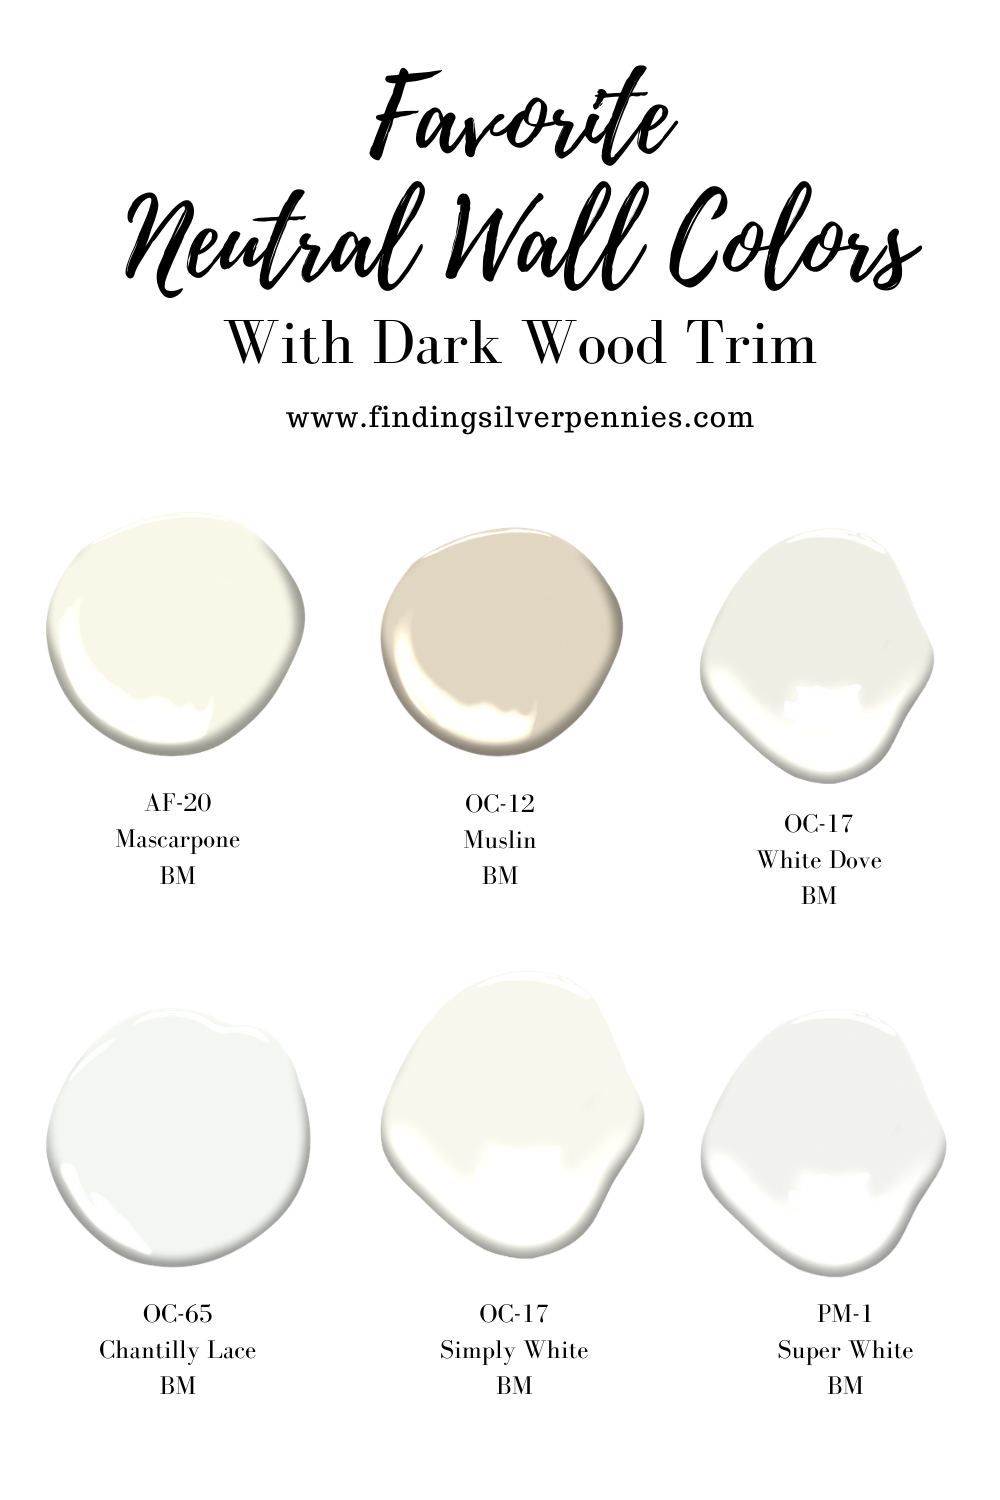 How to Choose Paint Colors for Rooms with Wood Trim